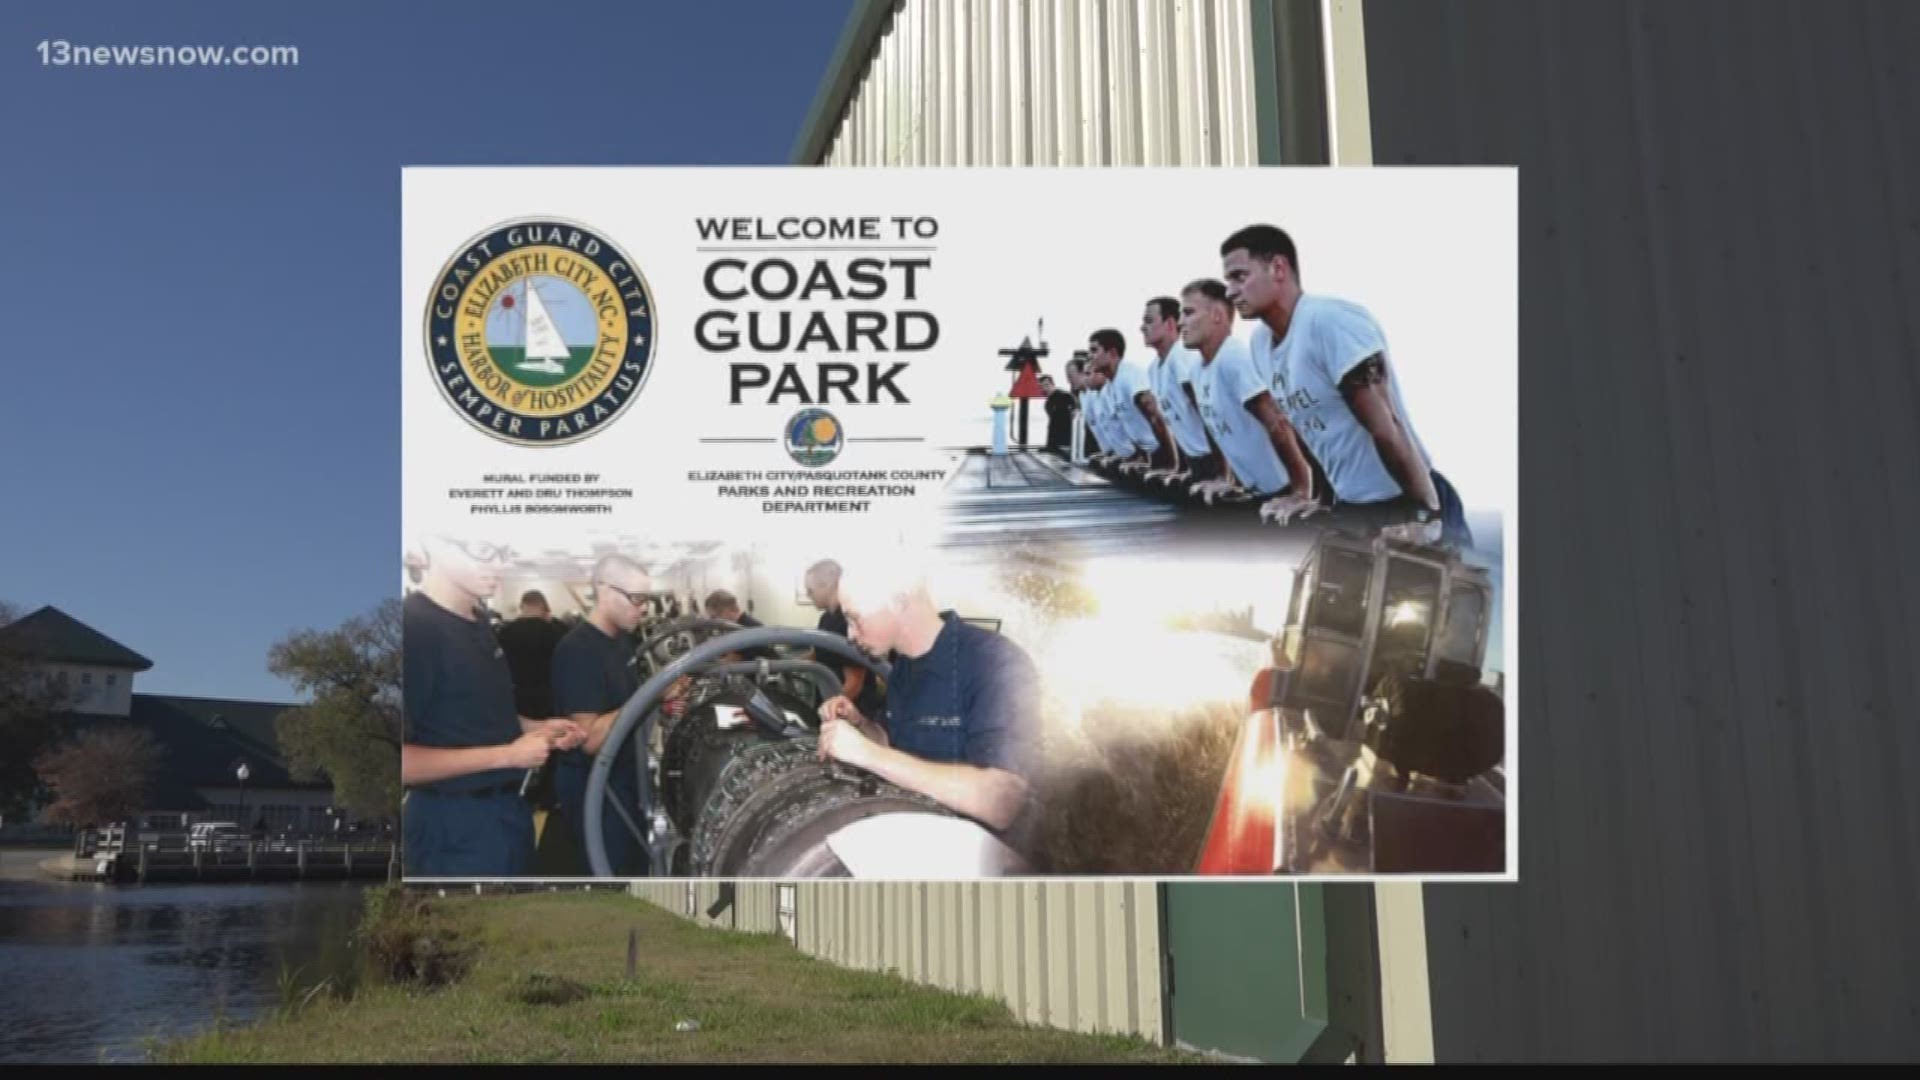 There's looming discussions over the design of a proposed tribute to the Coast Guard in Elizabeth City